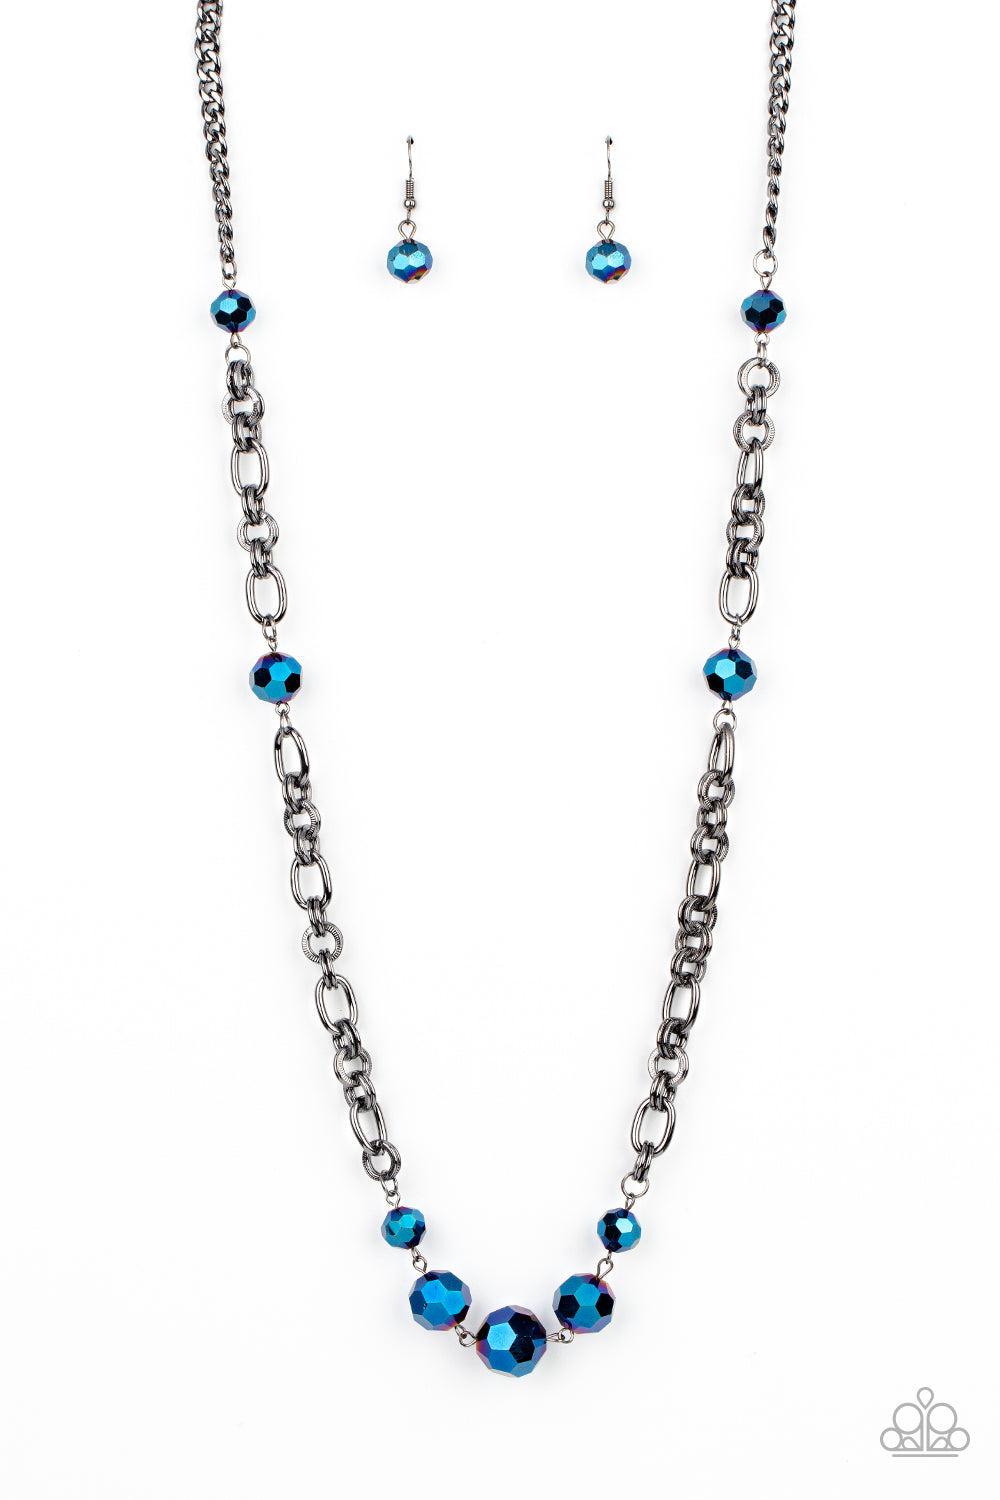 Prismatic Pick-Me-Up Multi &quot;Oil Spill&quot; Blue &amp; Gunmetal Necklace - Paparazzi Accessories- lightbox - CarasShop.com - $5 Jewelry by Cara Jewels